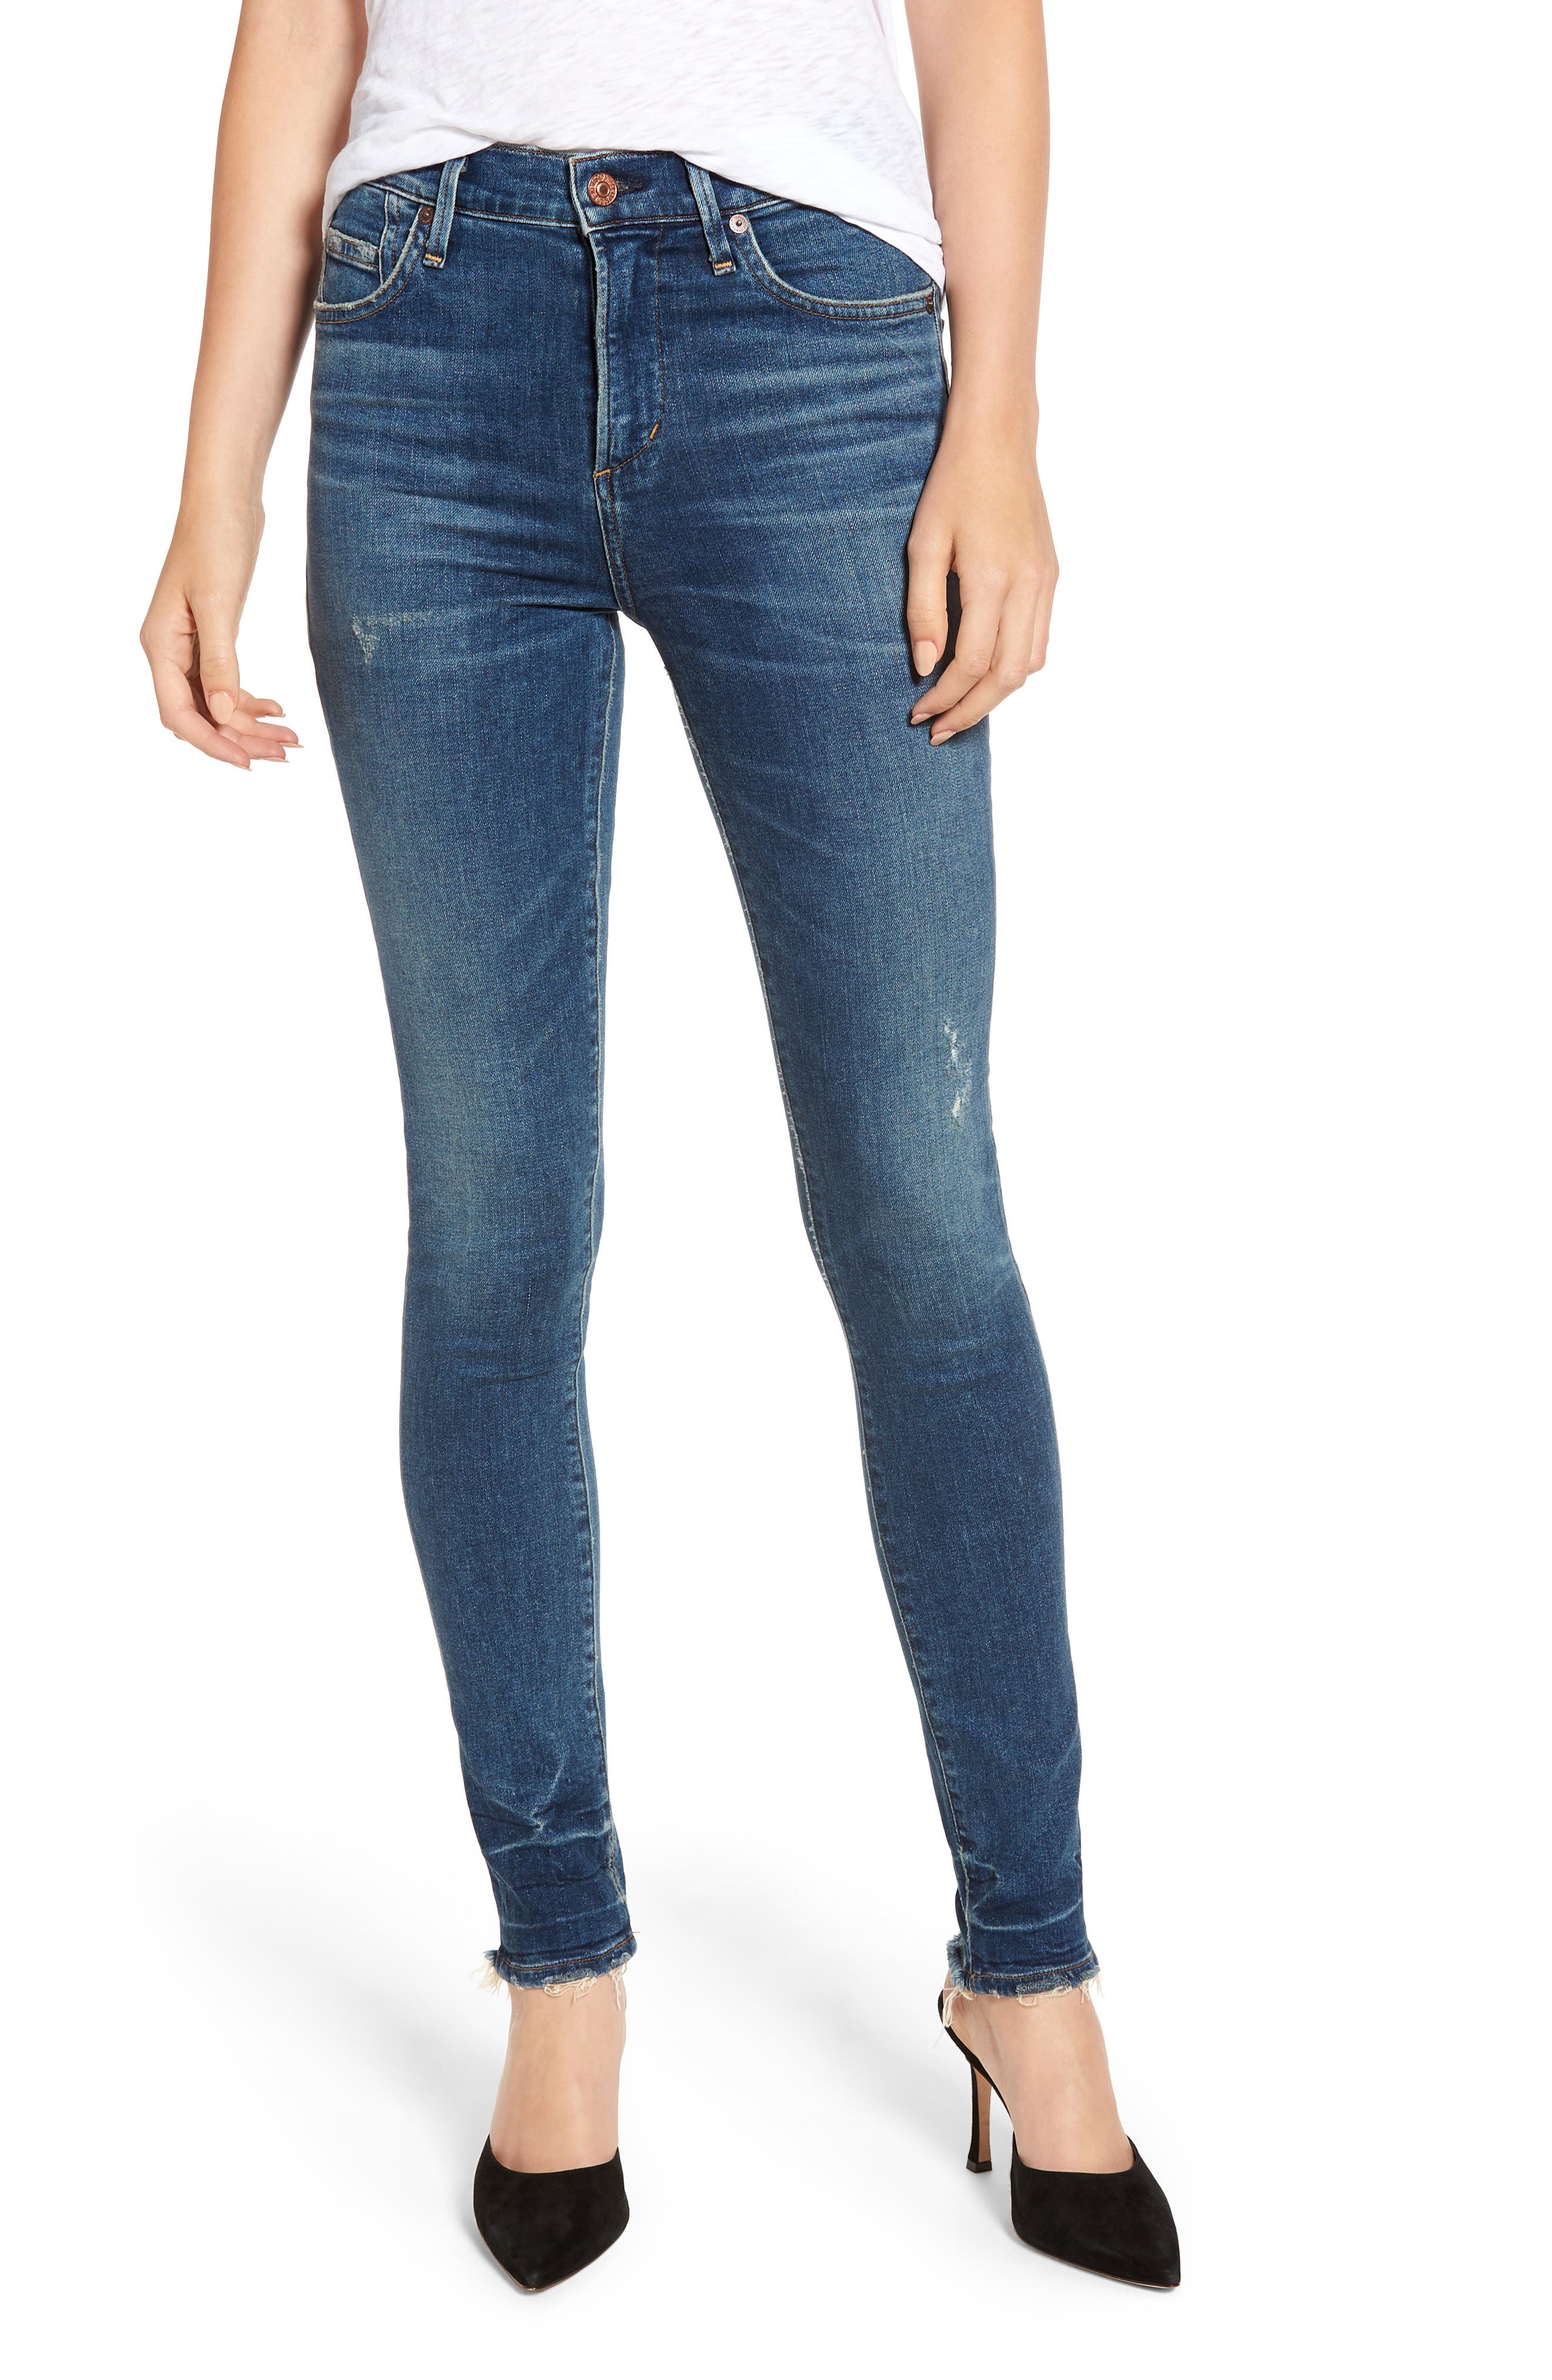 citizens of humanity jeans rocket high rise skinny